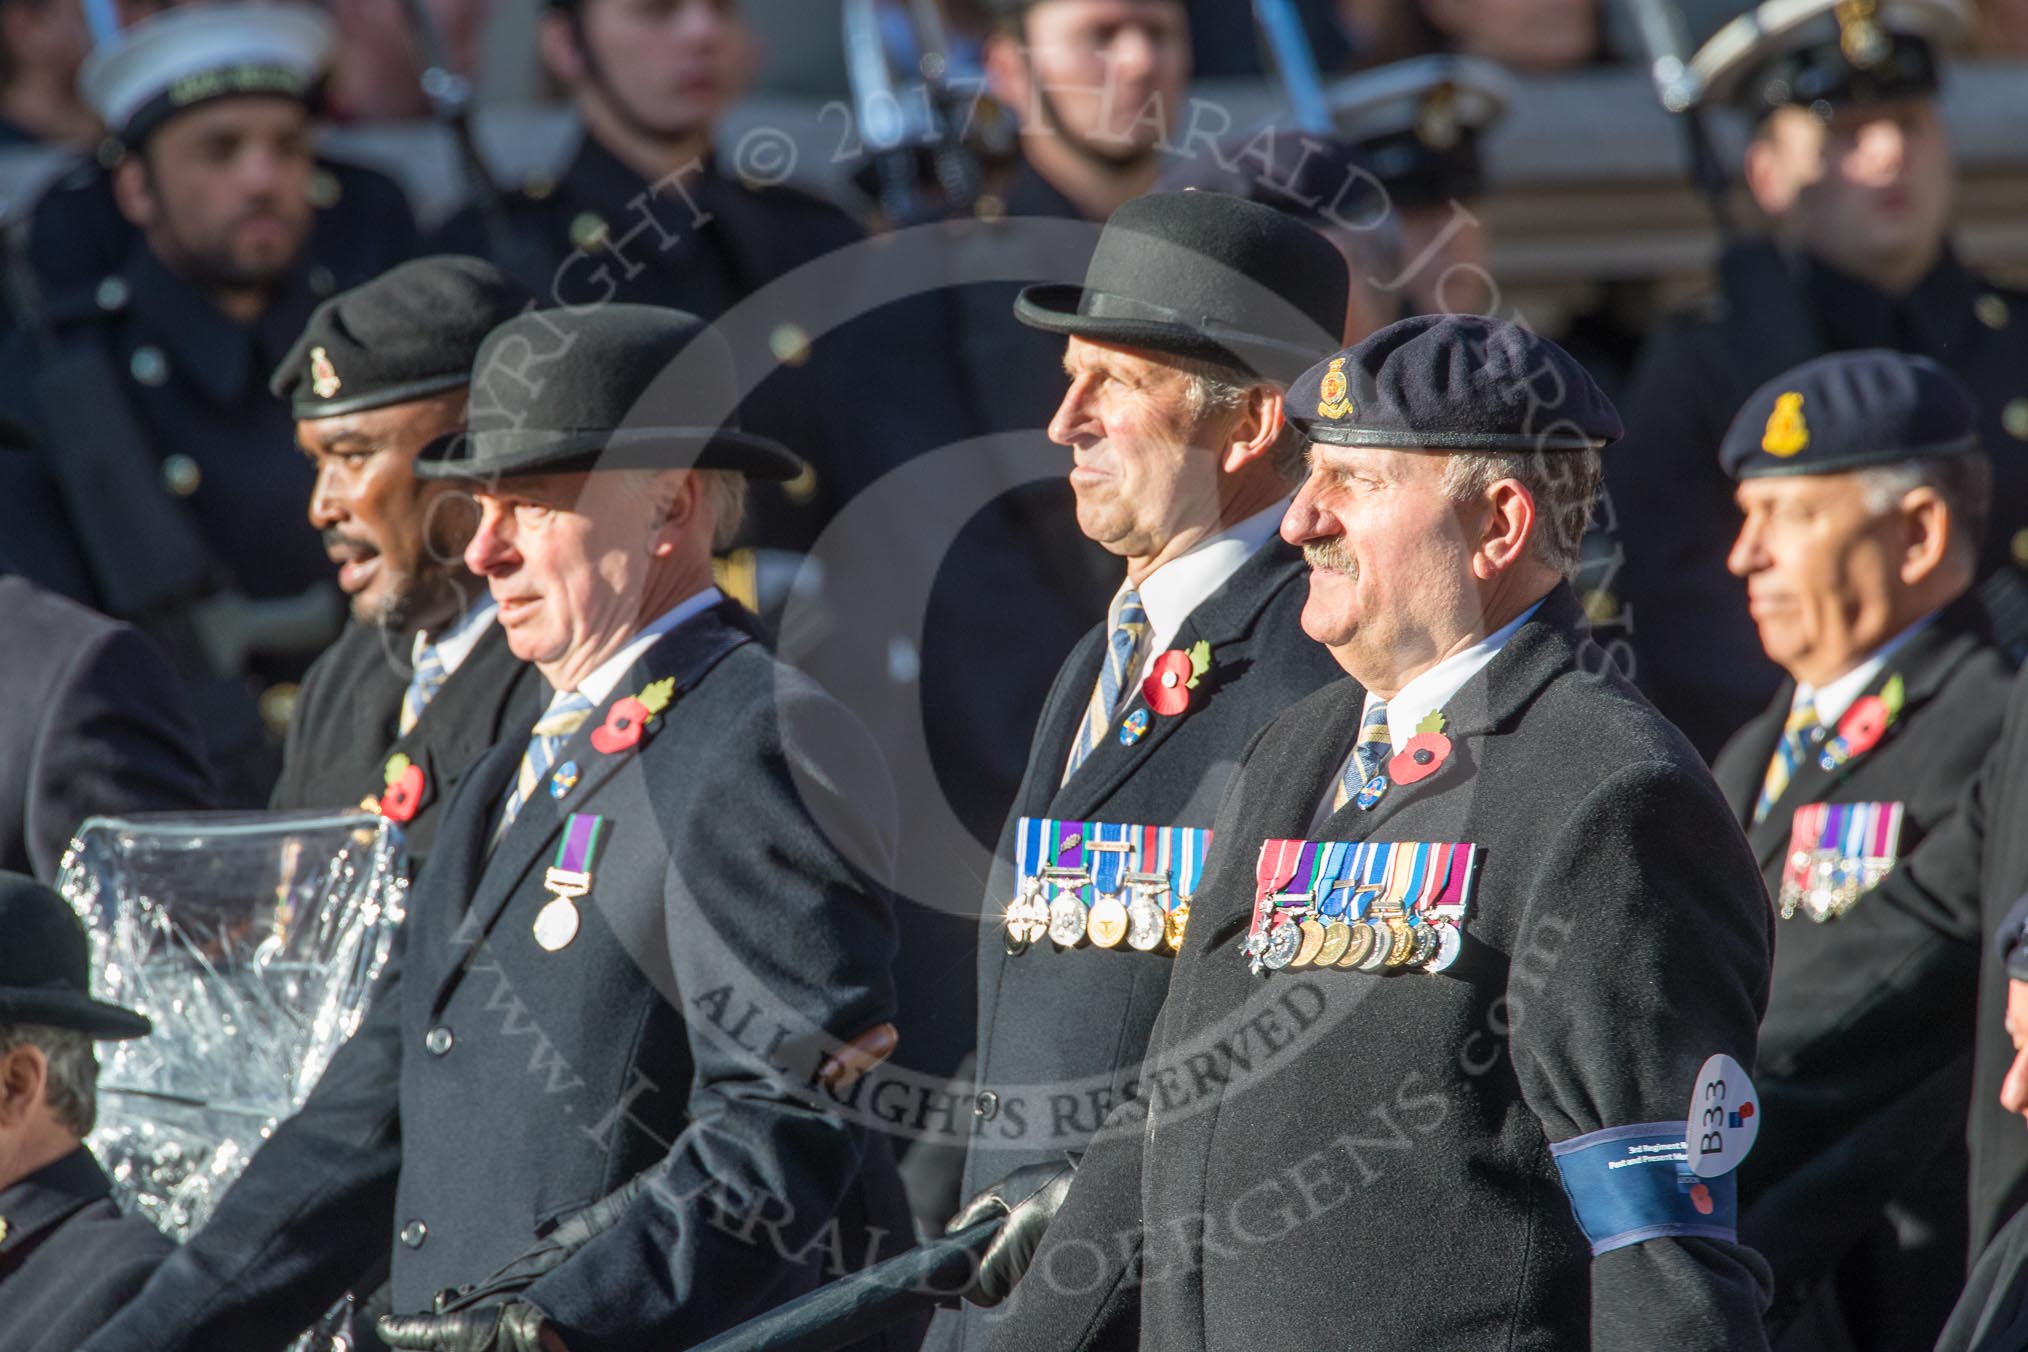 3rd Regiment Royal Horse Artillery Past and Present(Group B33, 70 members) during the Royal British Legion March Past on Remembrance Sunday at the Cenotaph, Whitehall, Westminster, London, 11 November 2018, 12:12.